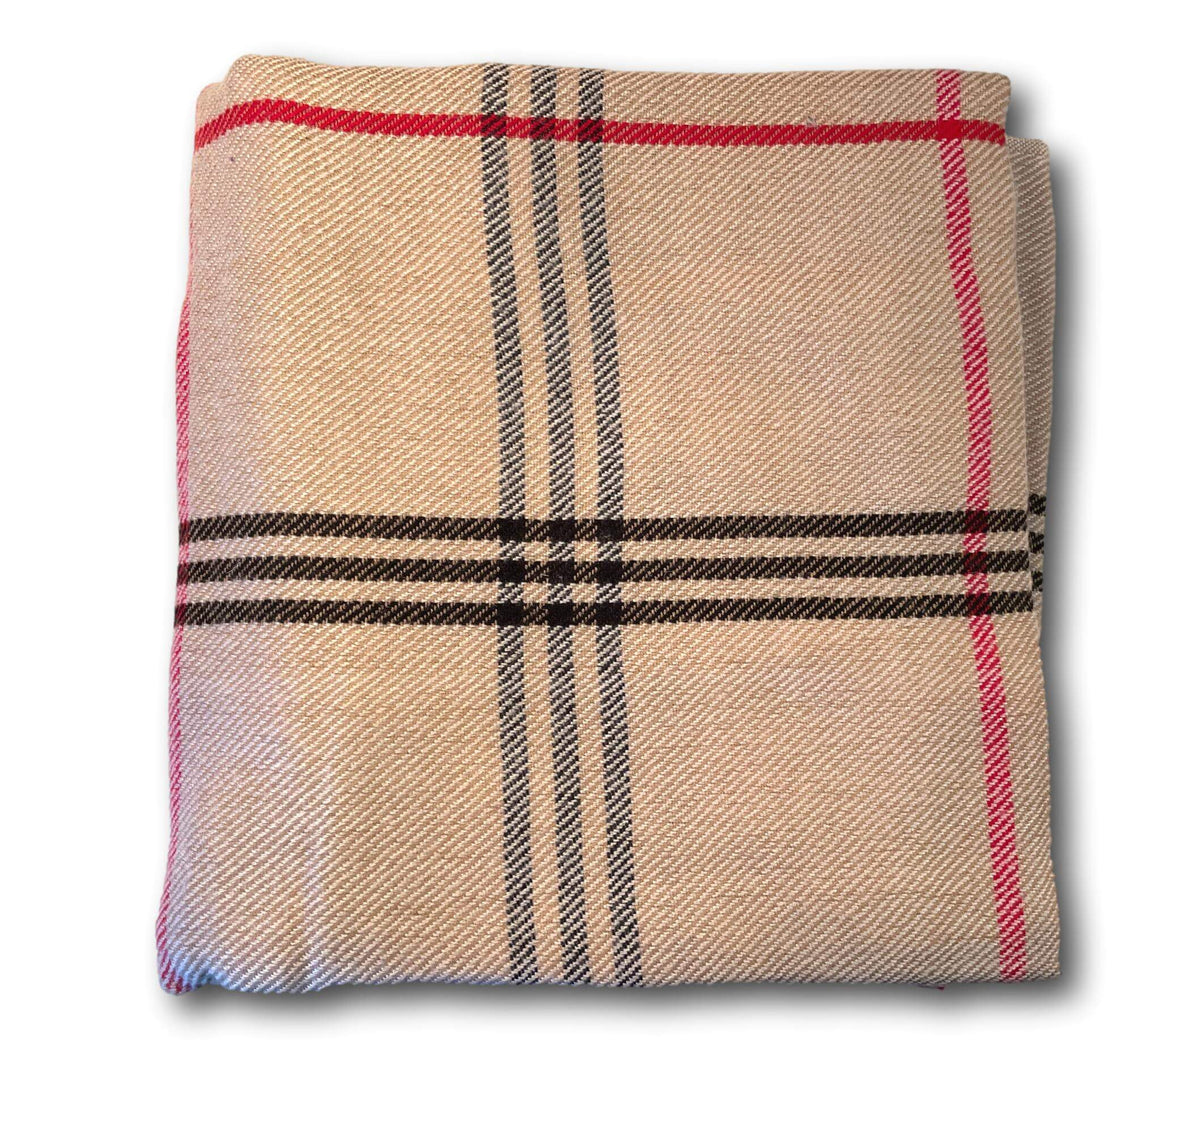 Large Burberry designed Style Cashmere Blanket - Handmade In Nepal 242x145cm